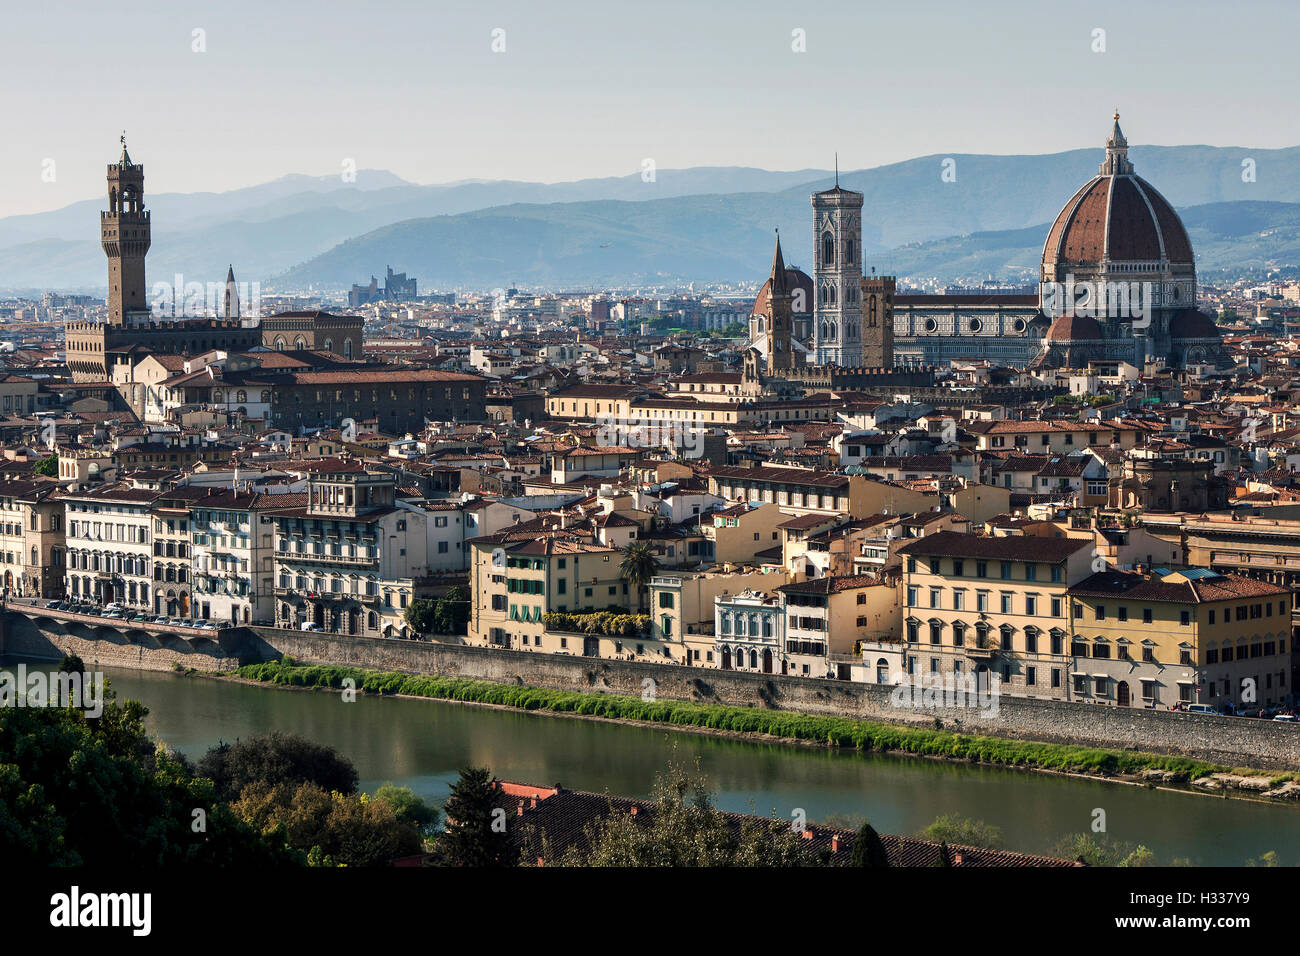 View from Piazzale Michelangelo, River Arno, Palazzo Vecchio, Dome and Cathedral of Santa Maria del Fiore, Florence, Tuscany Stock Photo